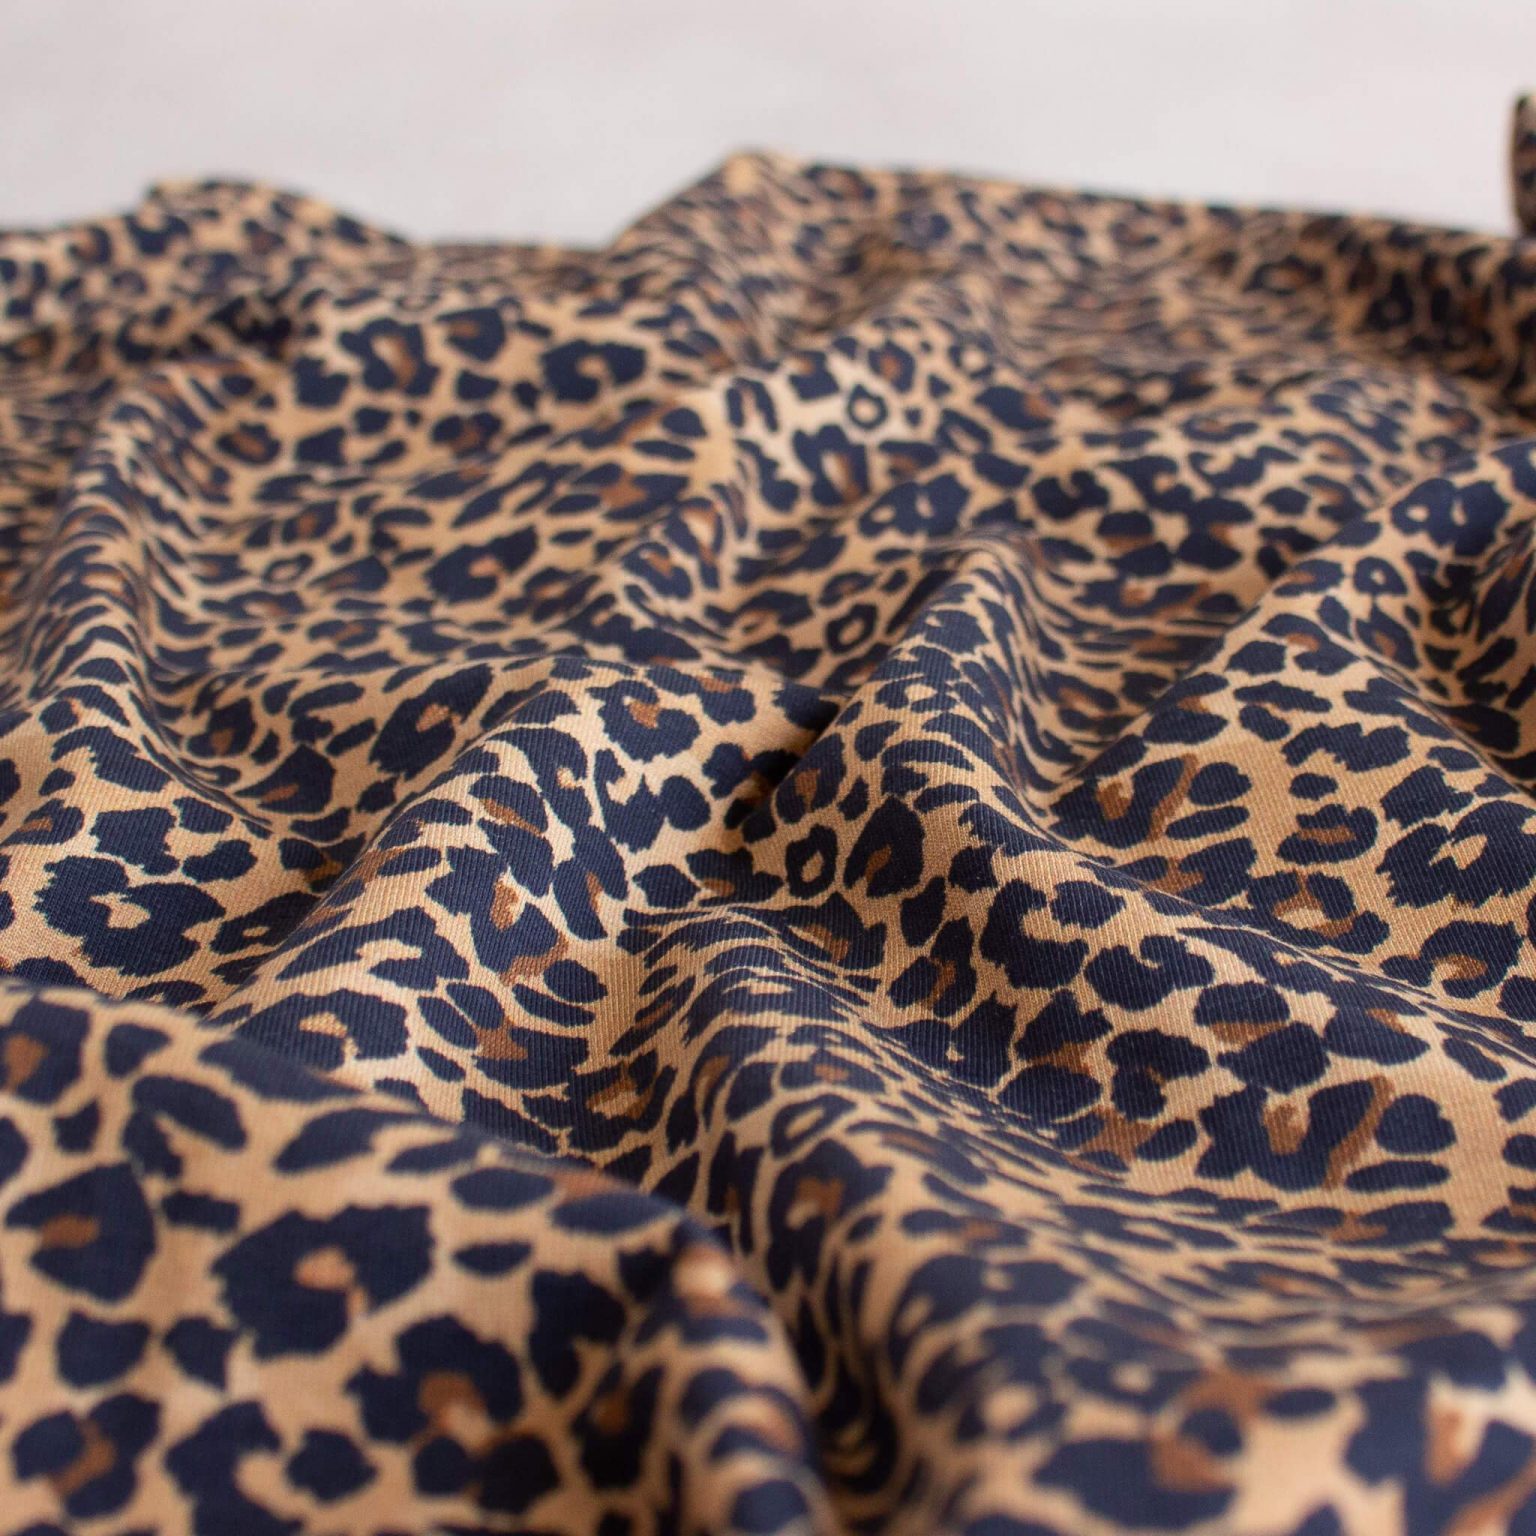 Leopard print jersey fabric scrunched up